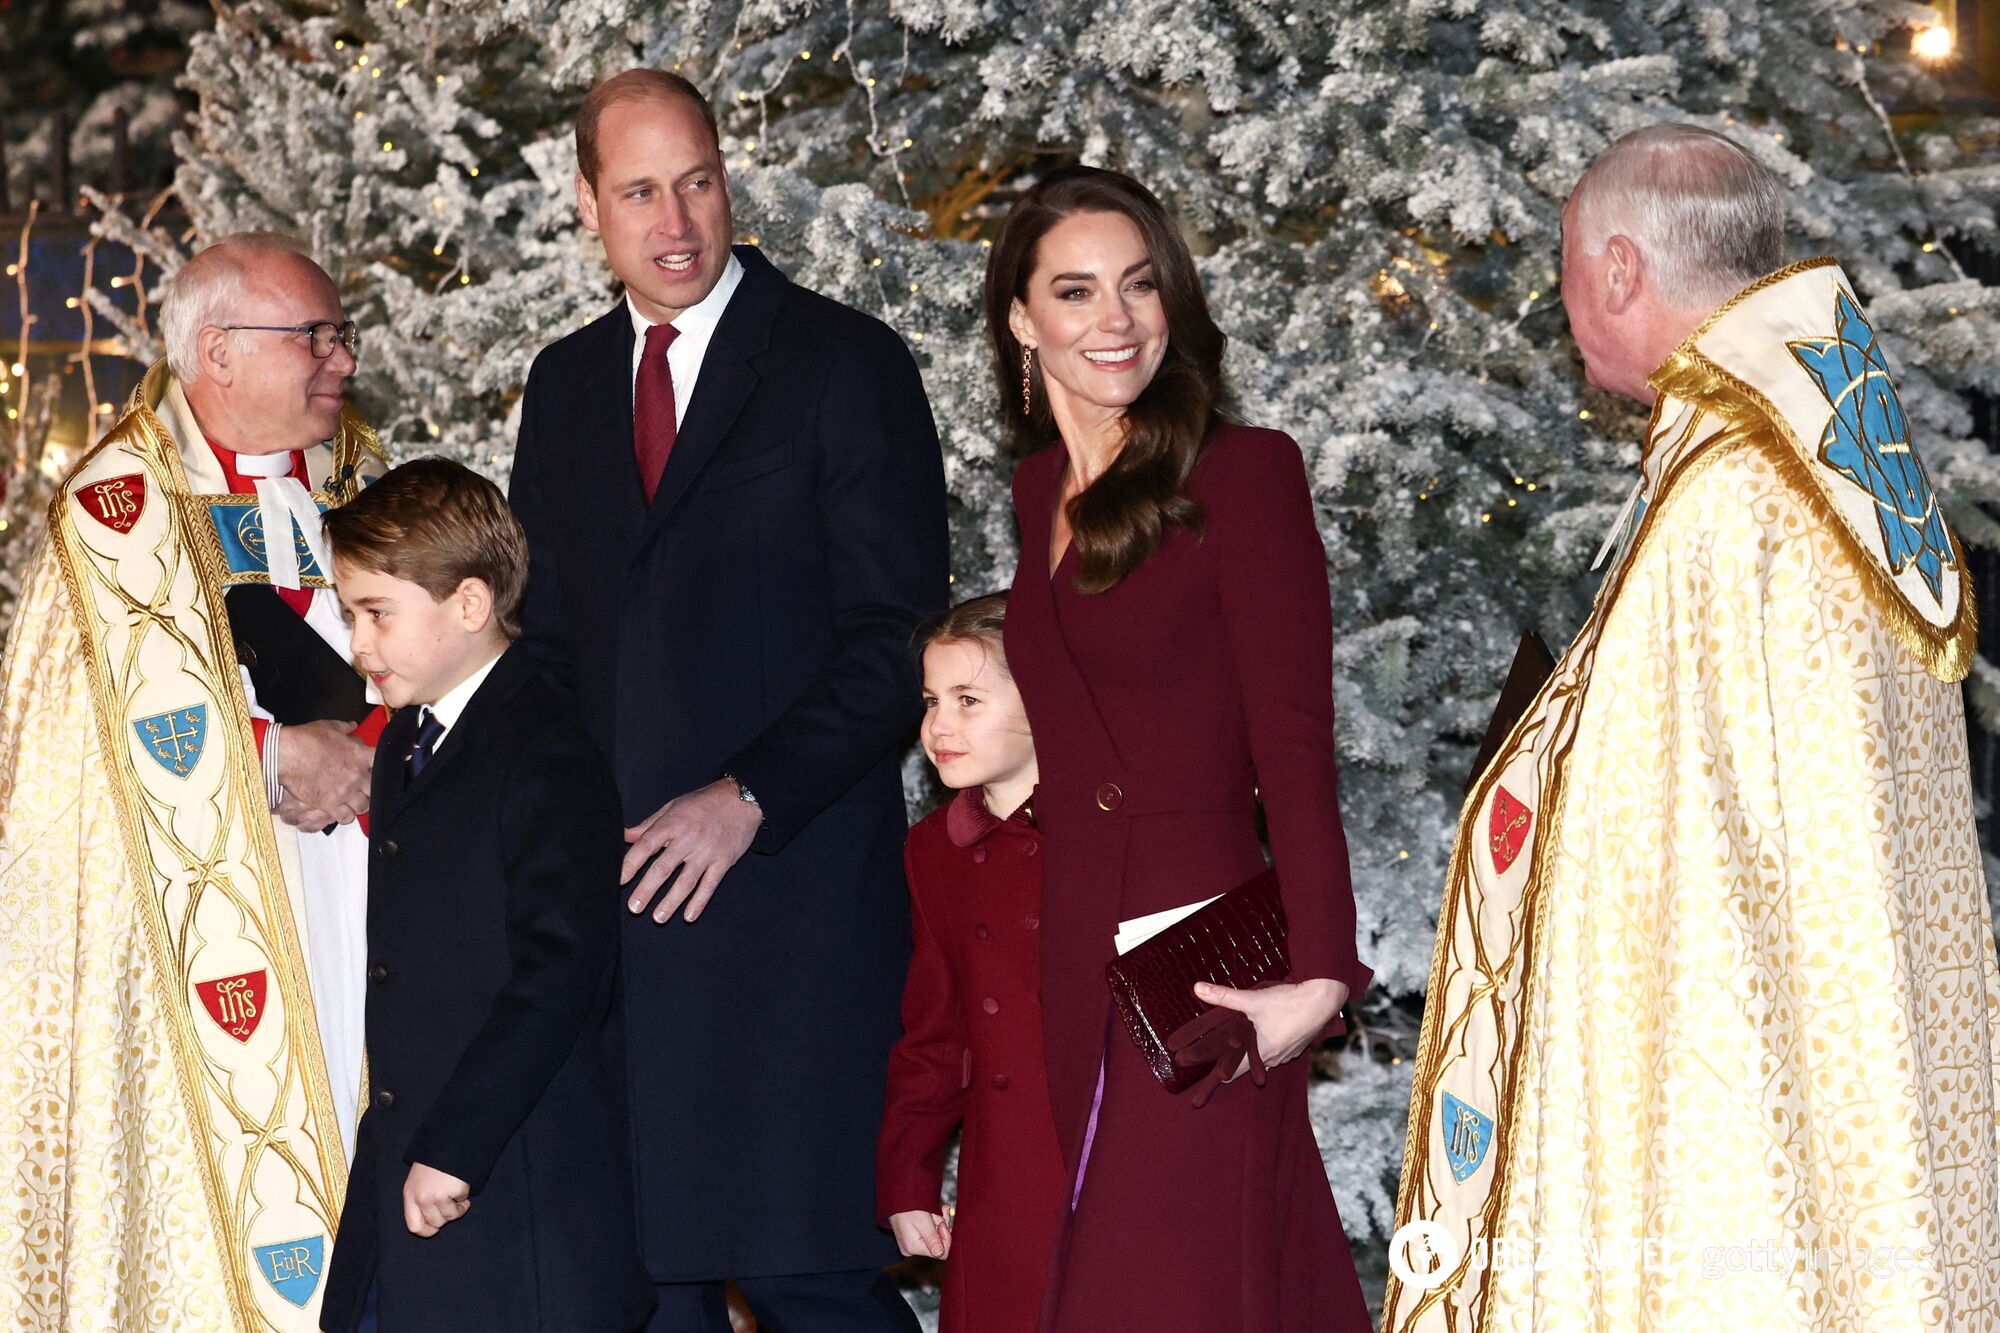 Christmas in a royal way: 5 Windsor traditions you'll want to adopt